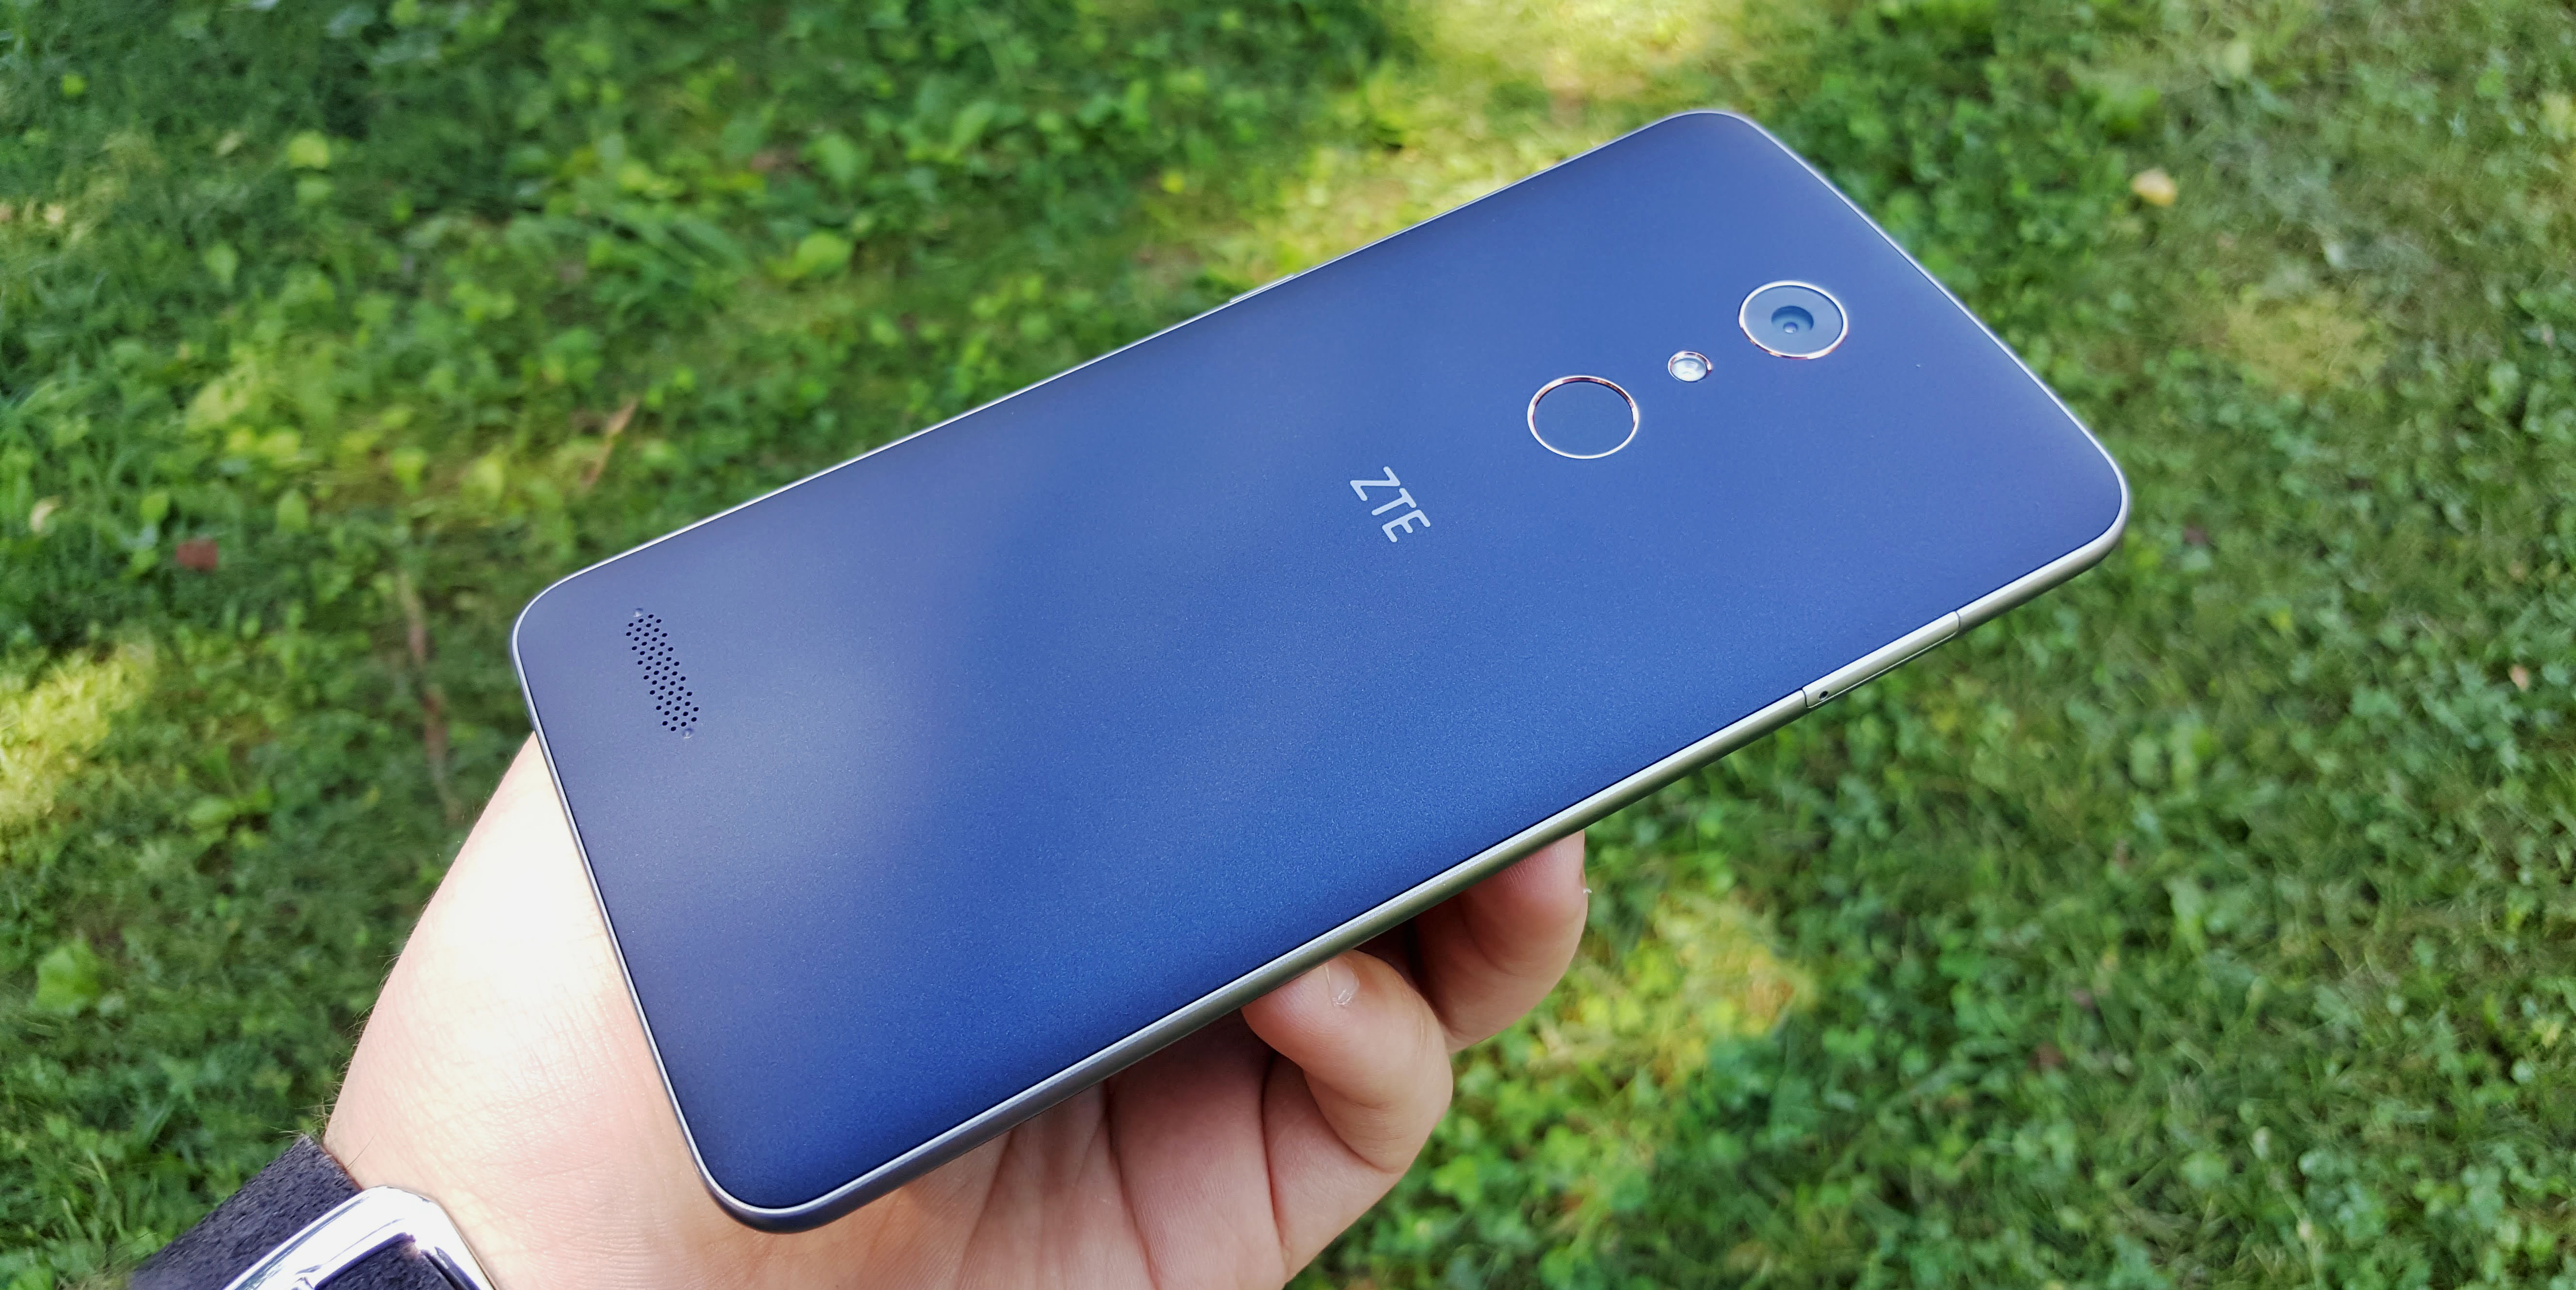 Hands-on: So far, using the $99 ZTE ZMax Pro is actually quite awesome